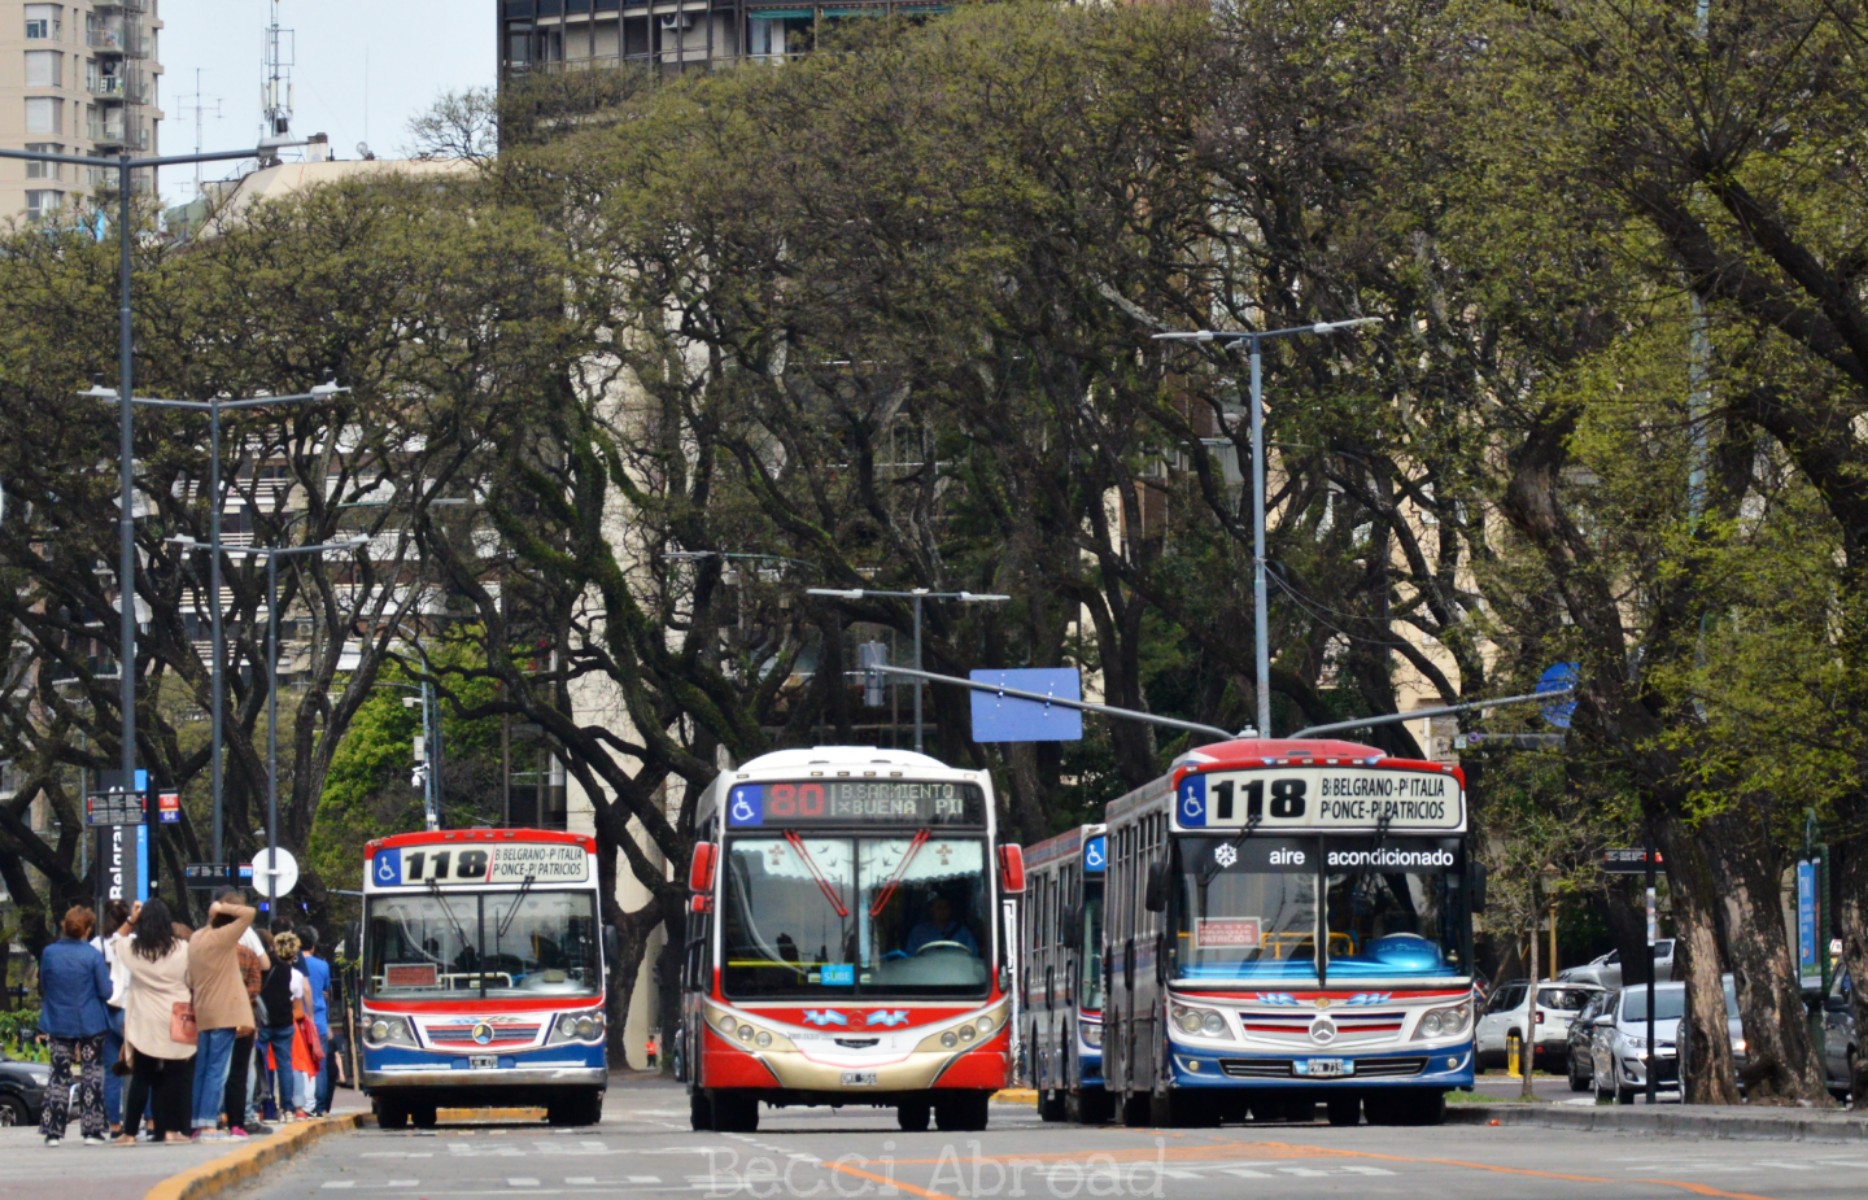 How to use the public buses in Buenos Aires